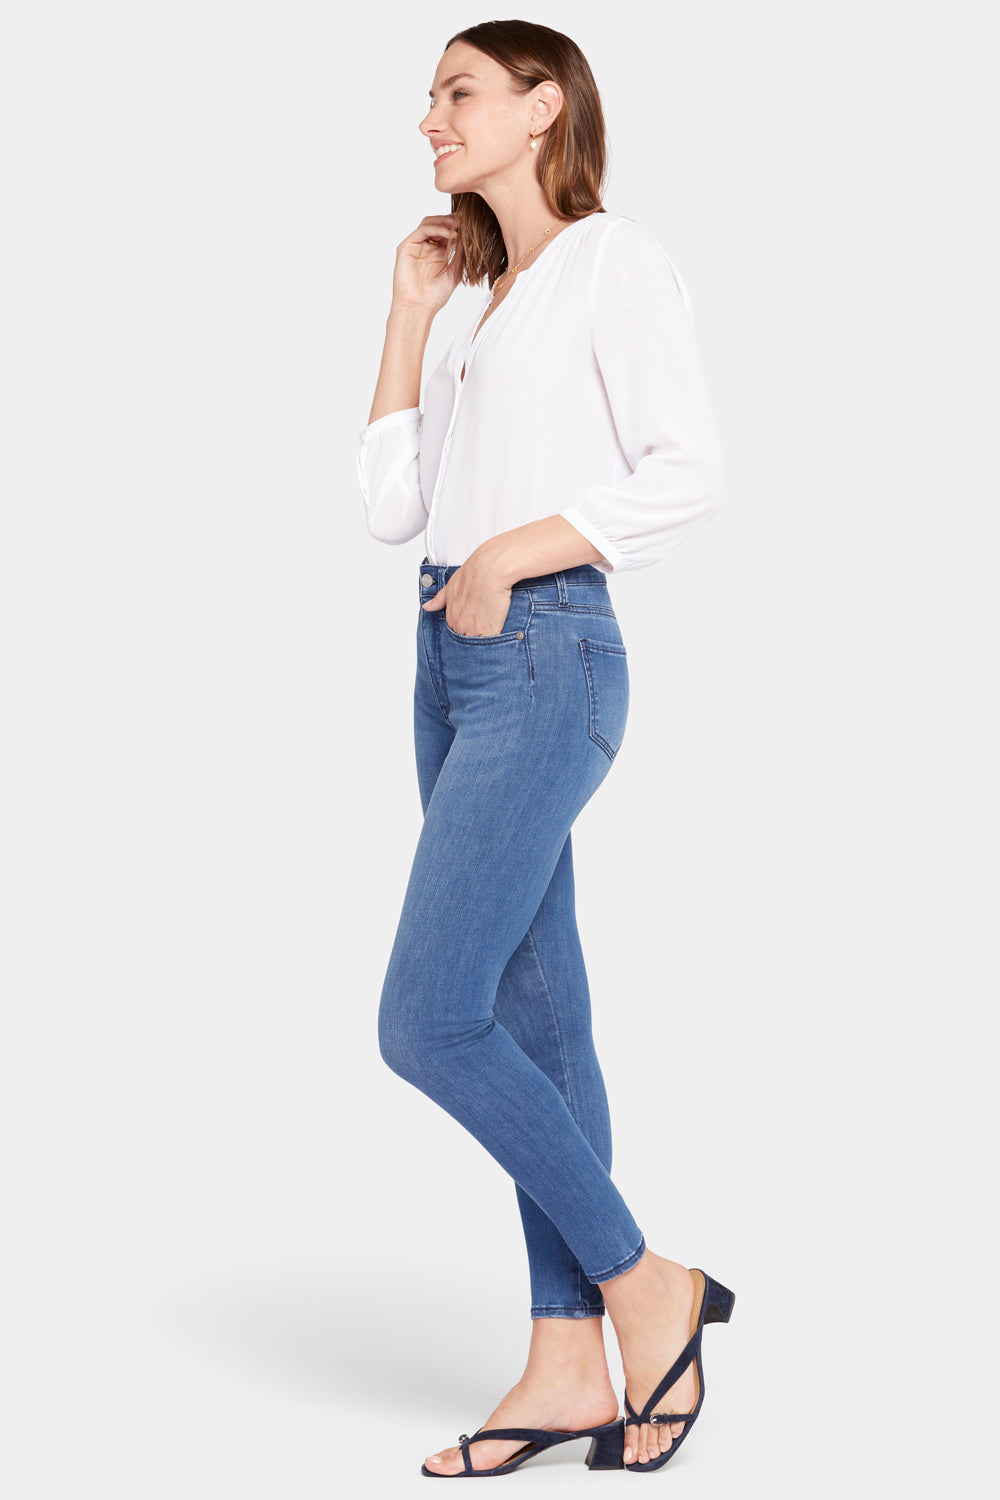 NYDJ Le Silhouette Ami Skinny Jeans In Petite With High Rise - Amour